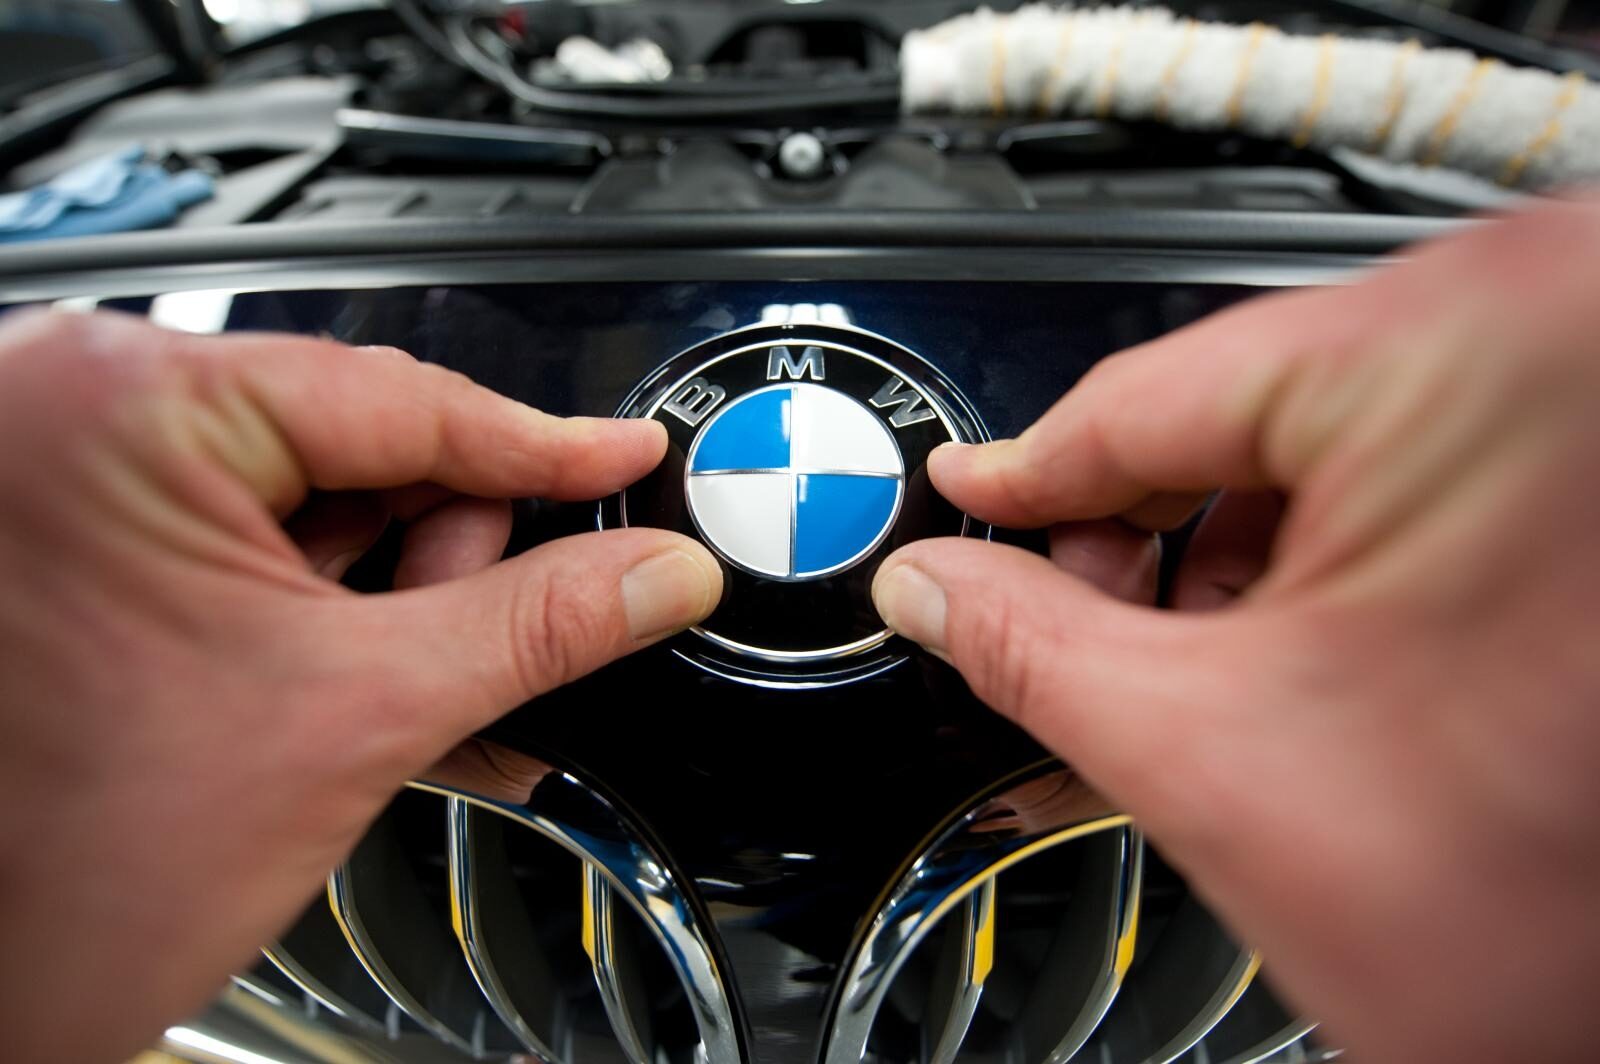 BMW production in the works in Dingolfing